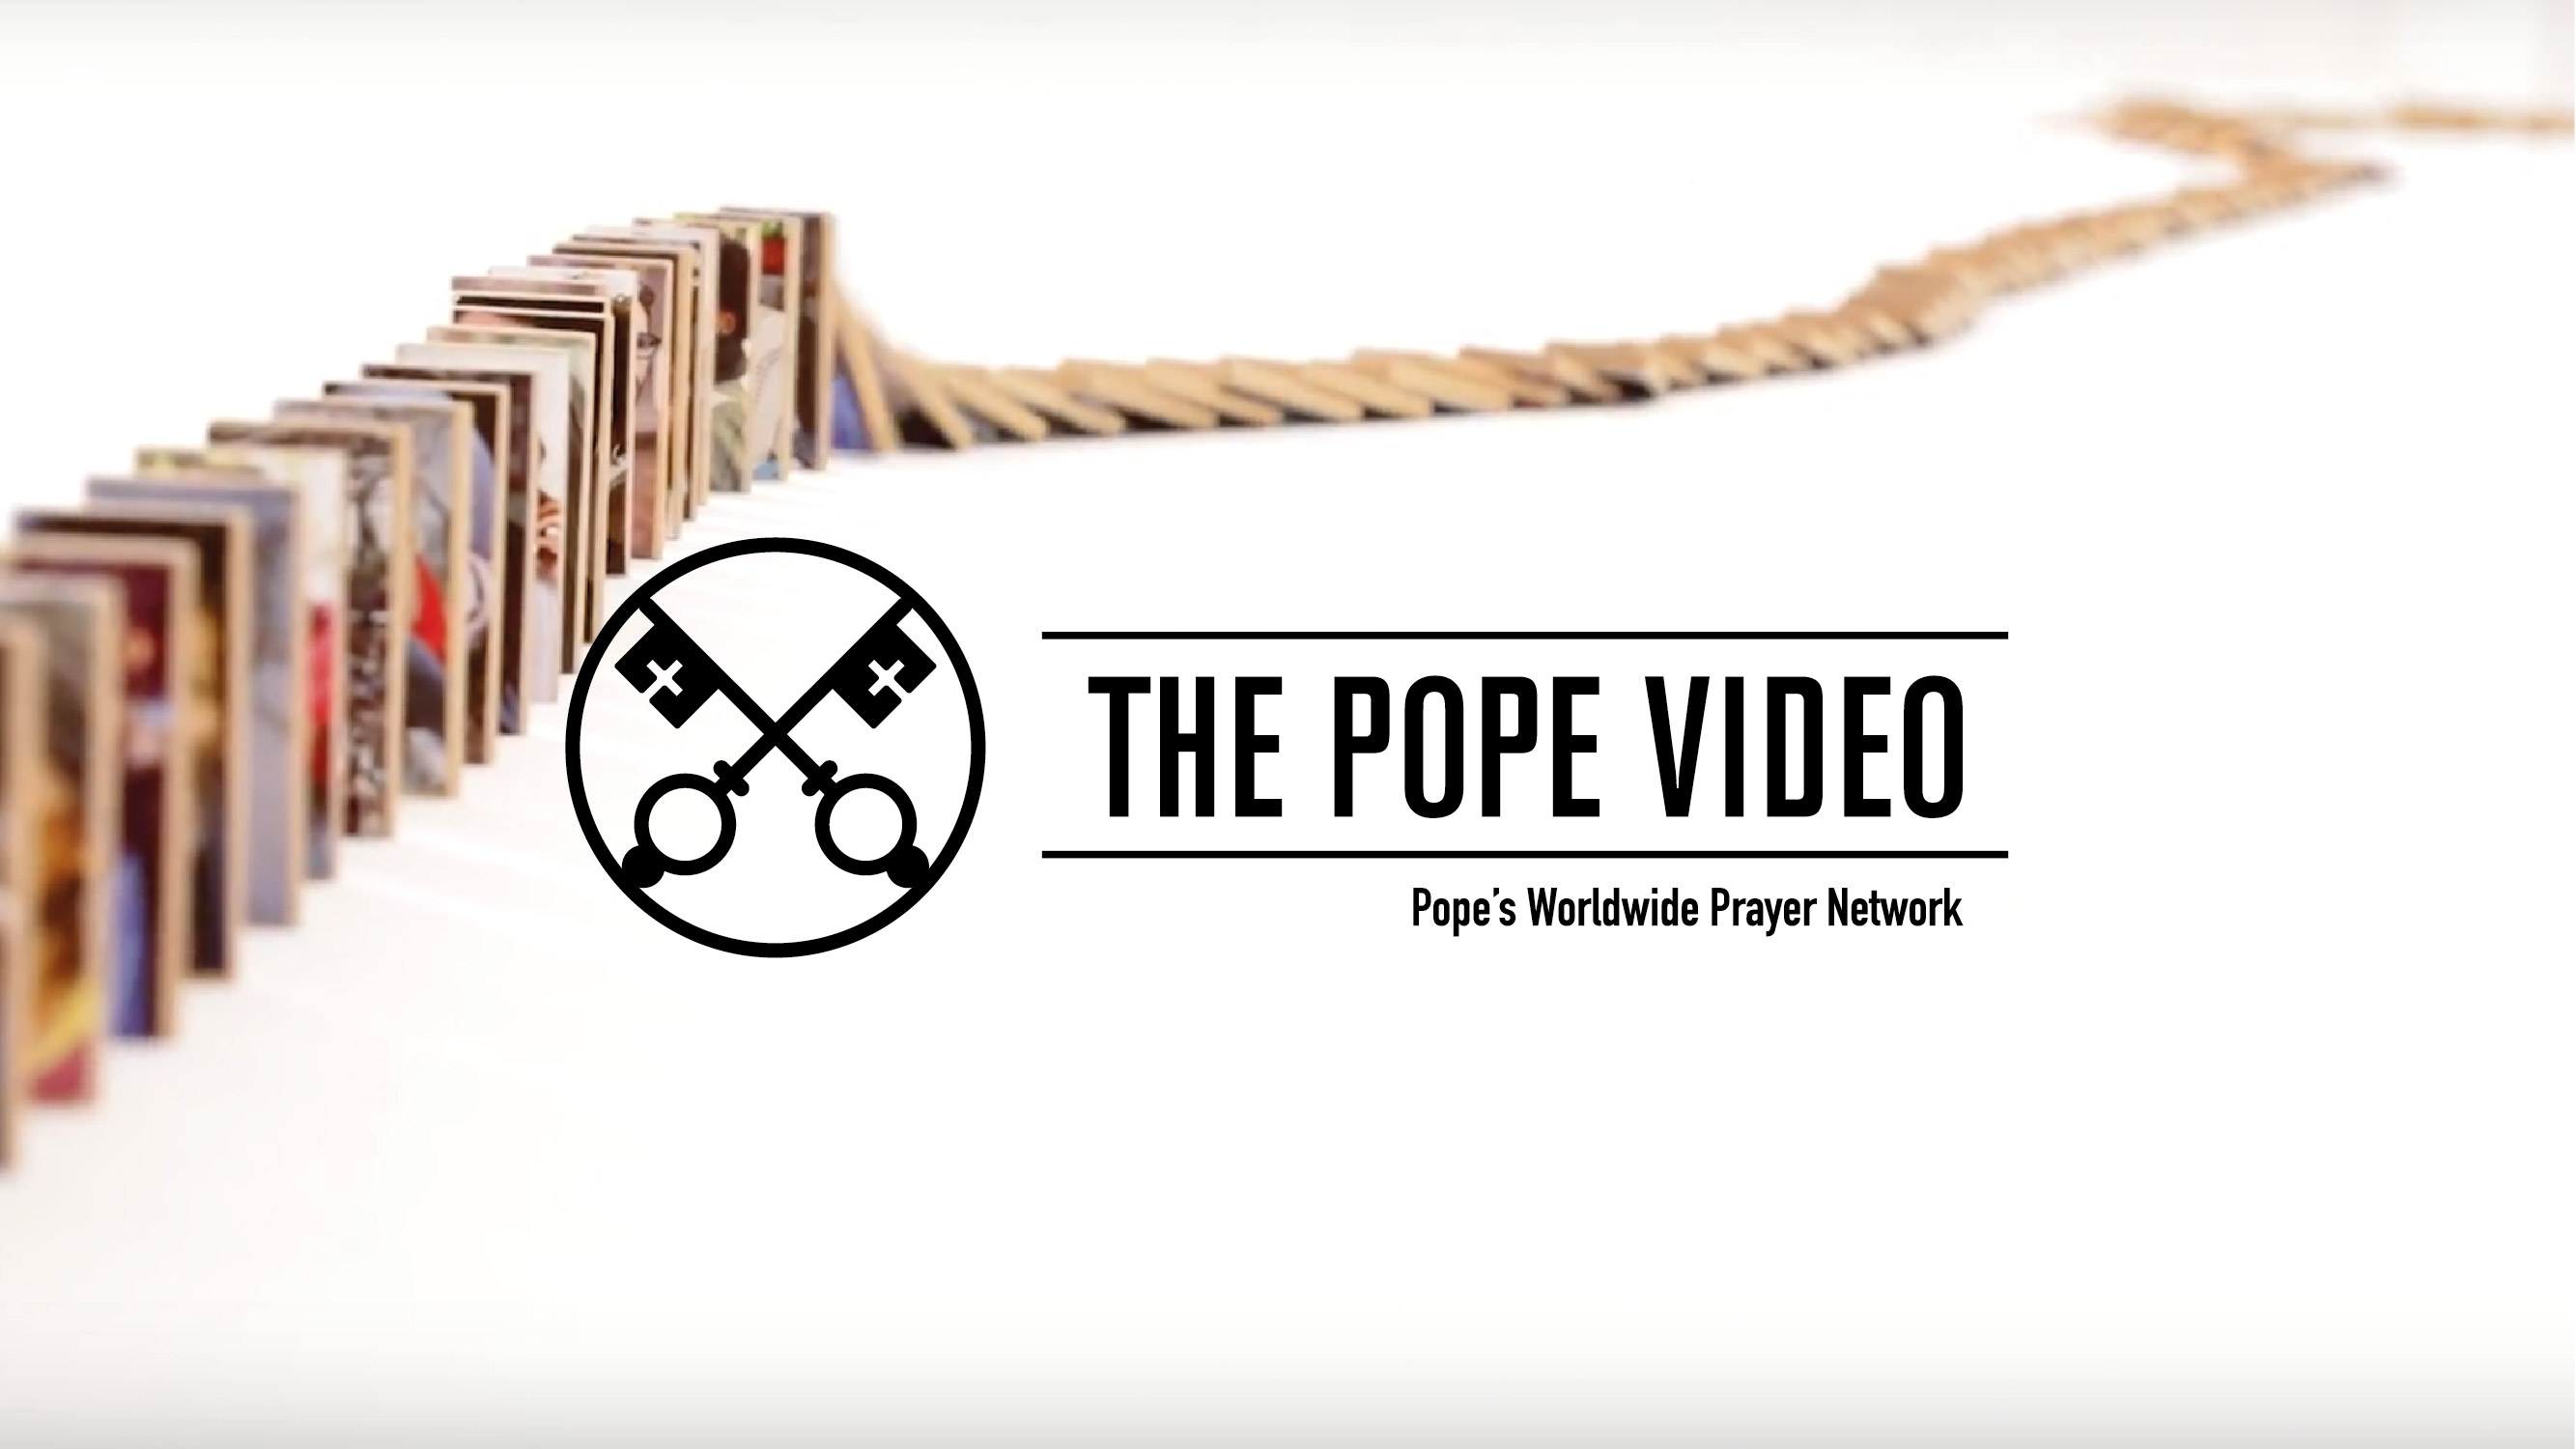 The Pope Video April 2018 (Official Image)